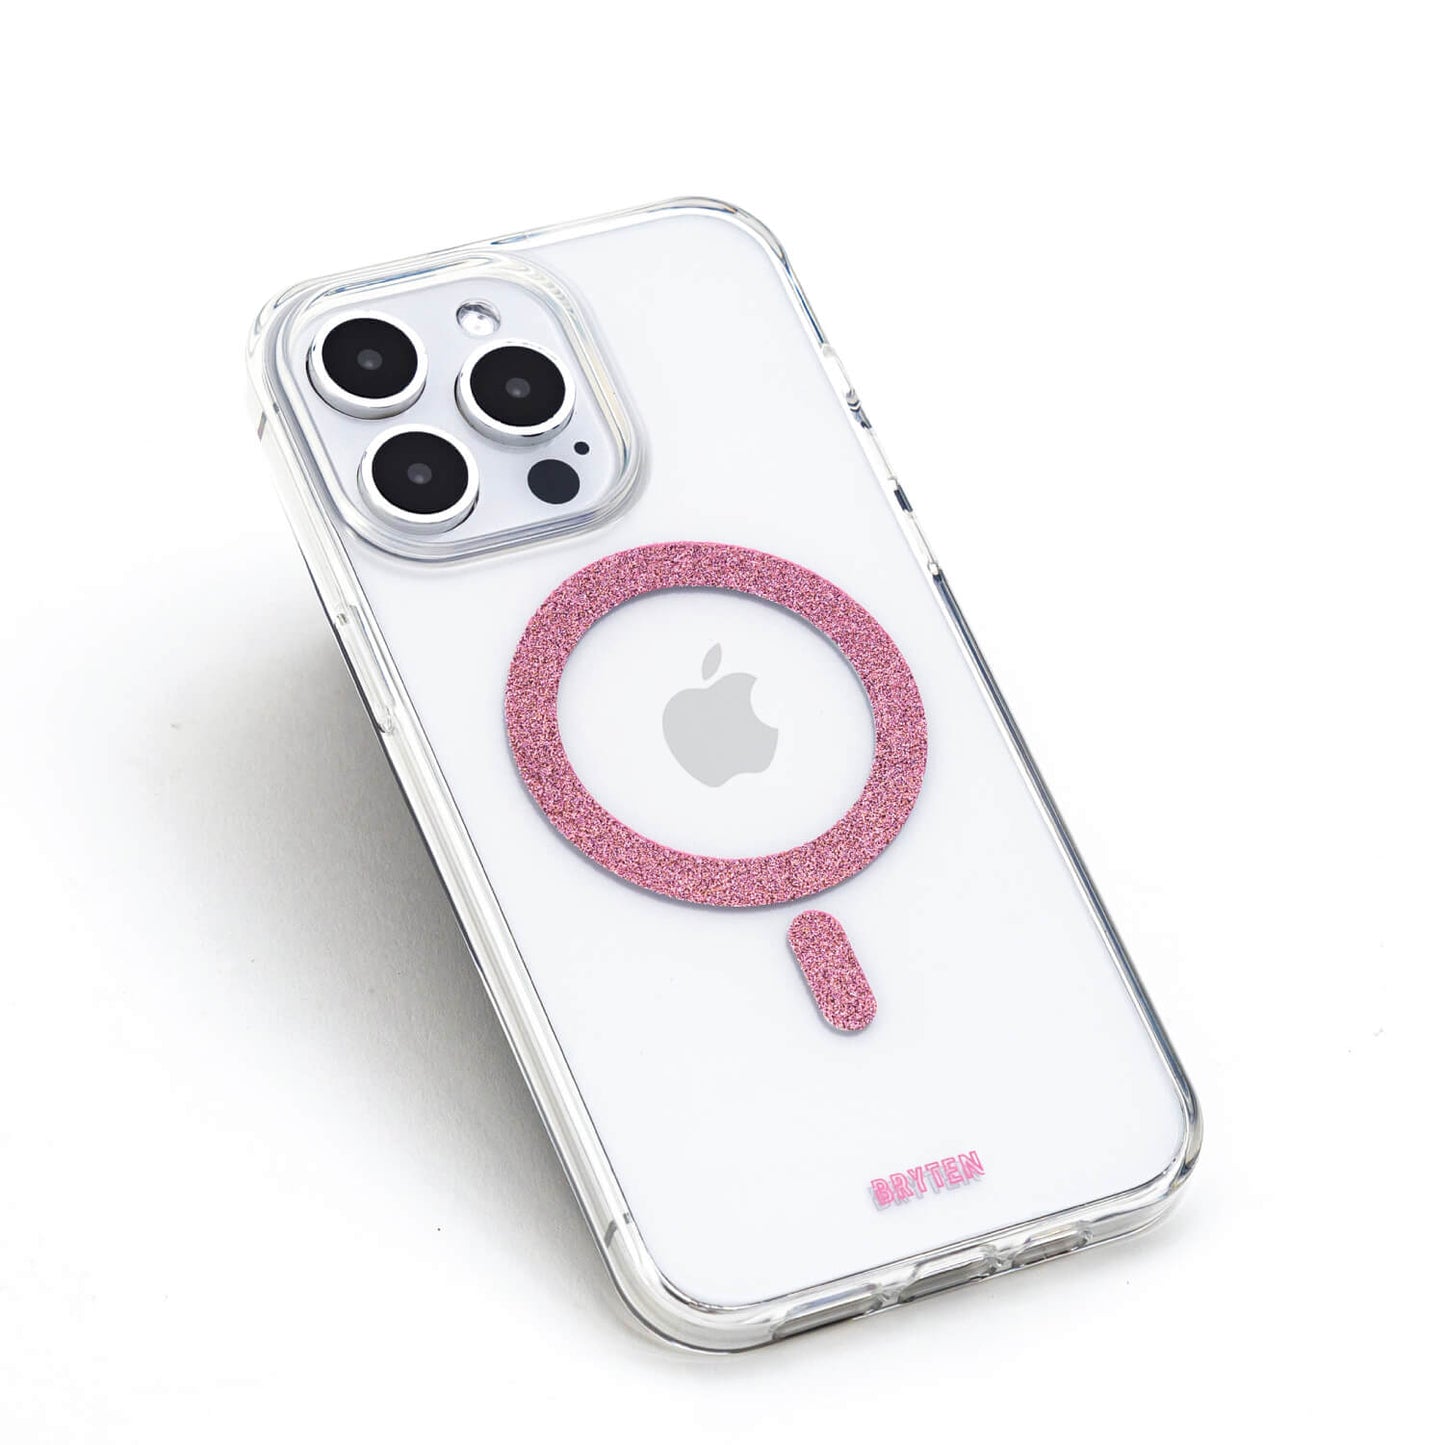 A clear iPhone 15 MagFx MagSafe Case - Bryten by Raptic with a pink logo on it, compatible with MagSafe charger.